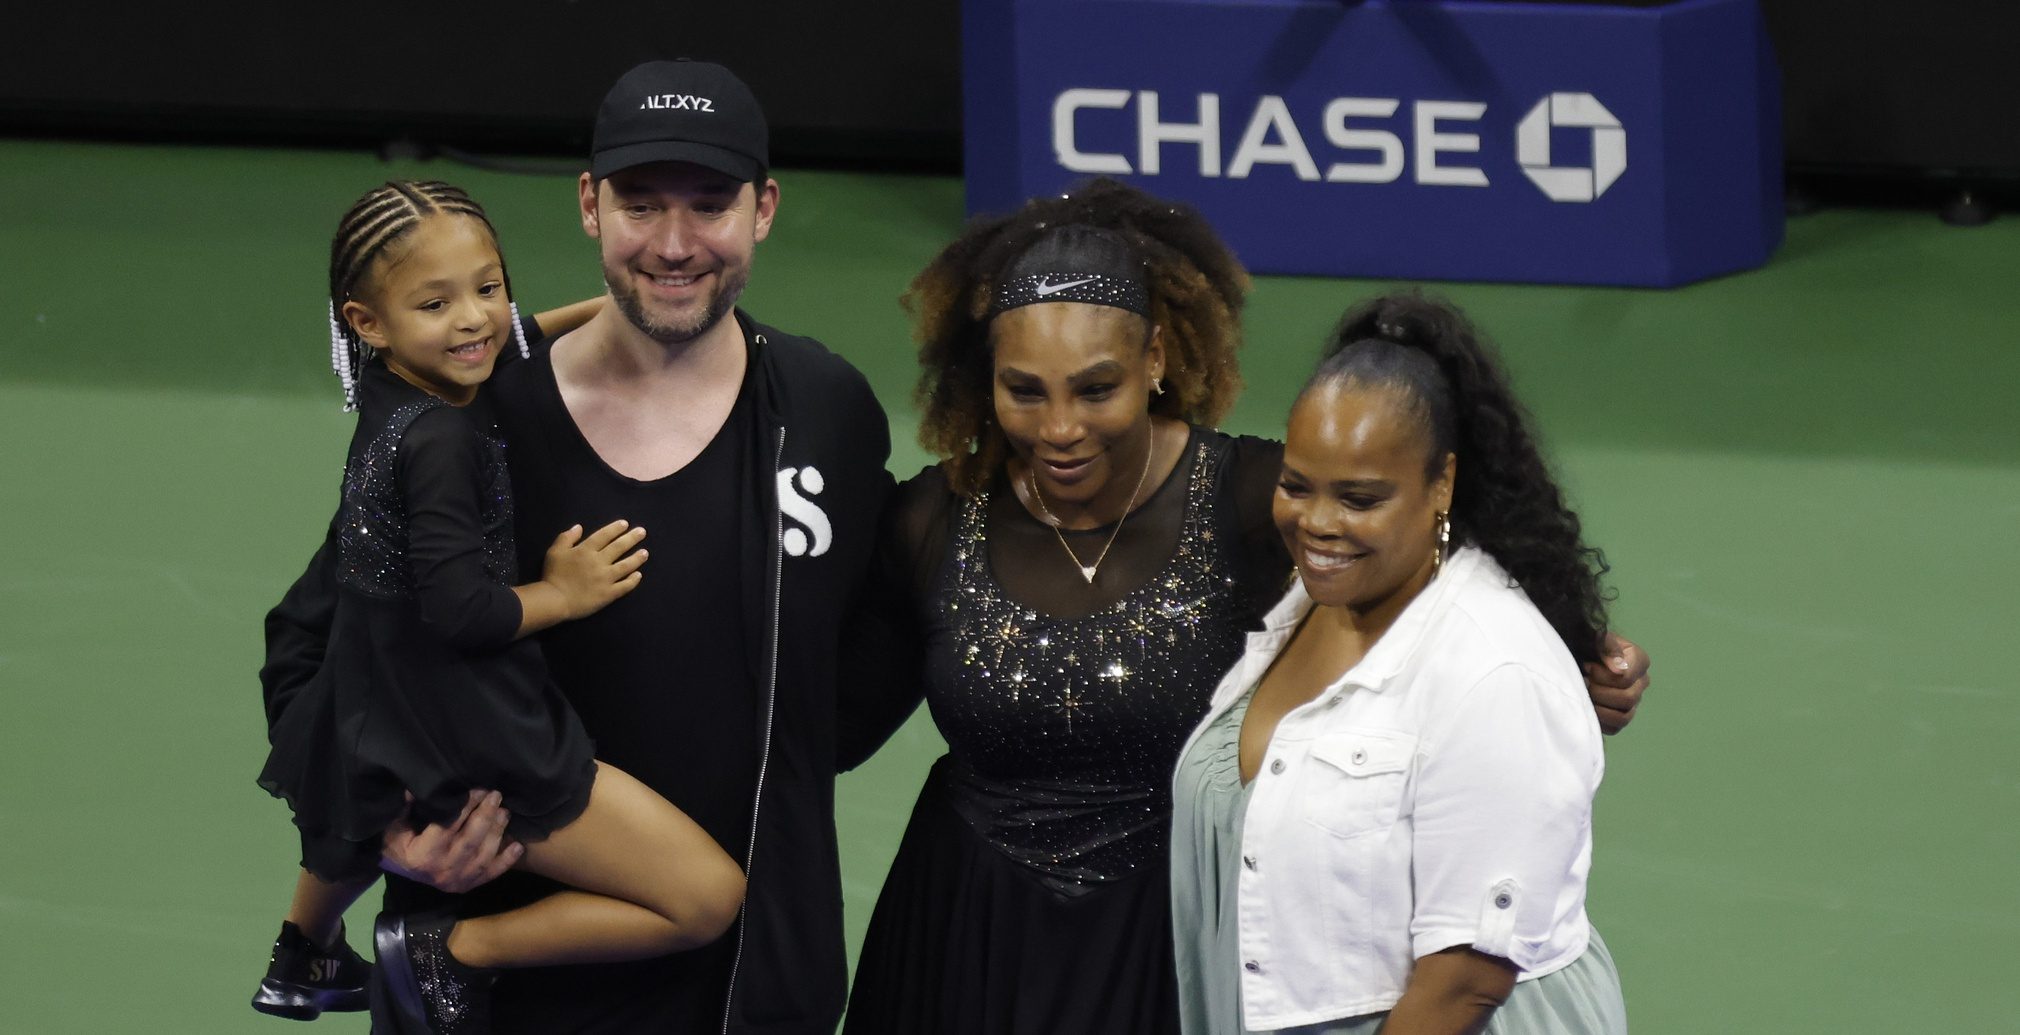 Serena Williams (USA) (M-L) poses for a picture with daughter Olympia (L), husband Alexis Ohanian (M-L), and sister Isha Price (R) after a ceremony honoring her career after her match against Danka Kovinic (MNE) (not pictured) on day one of the 2022 U.S. Open tennis tournament at USTA Billie Jean King National Tennis Center.